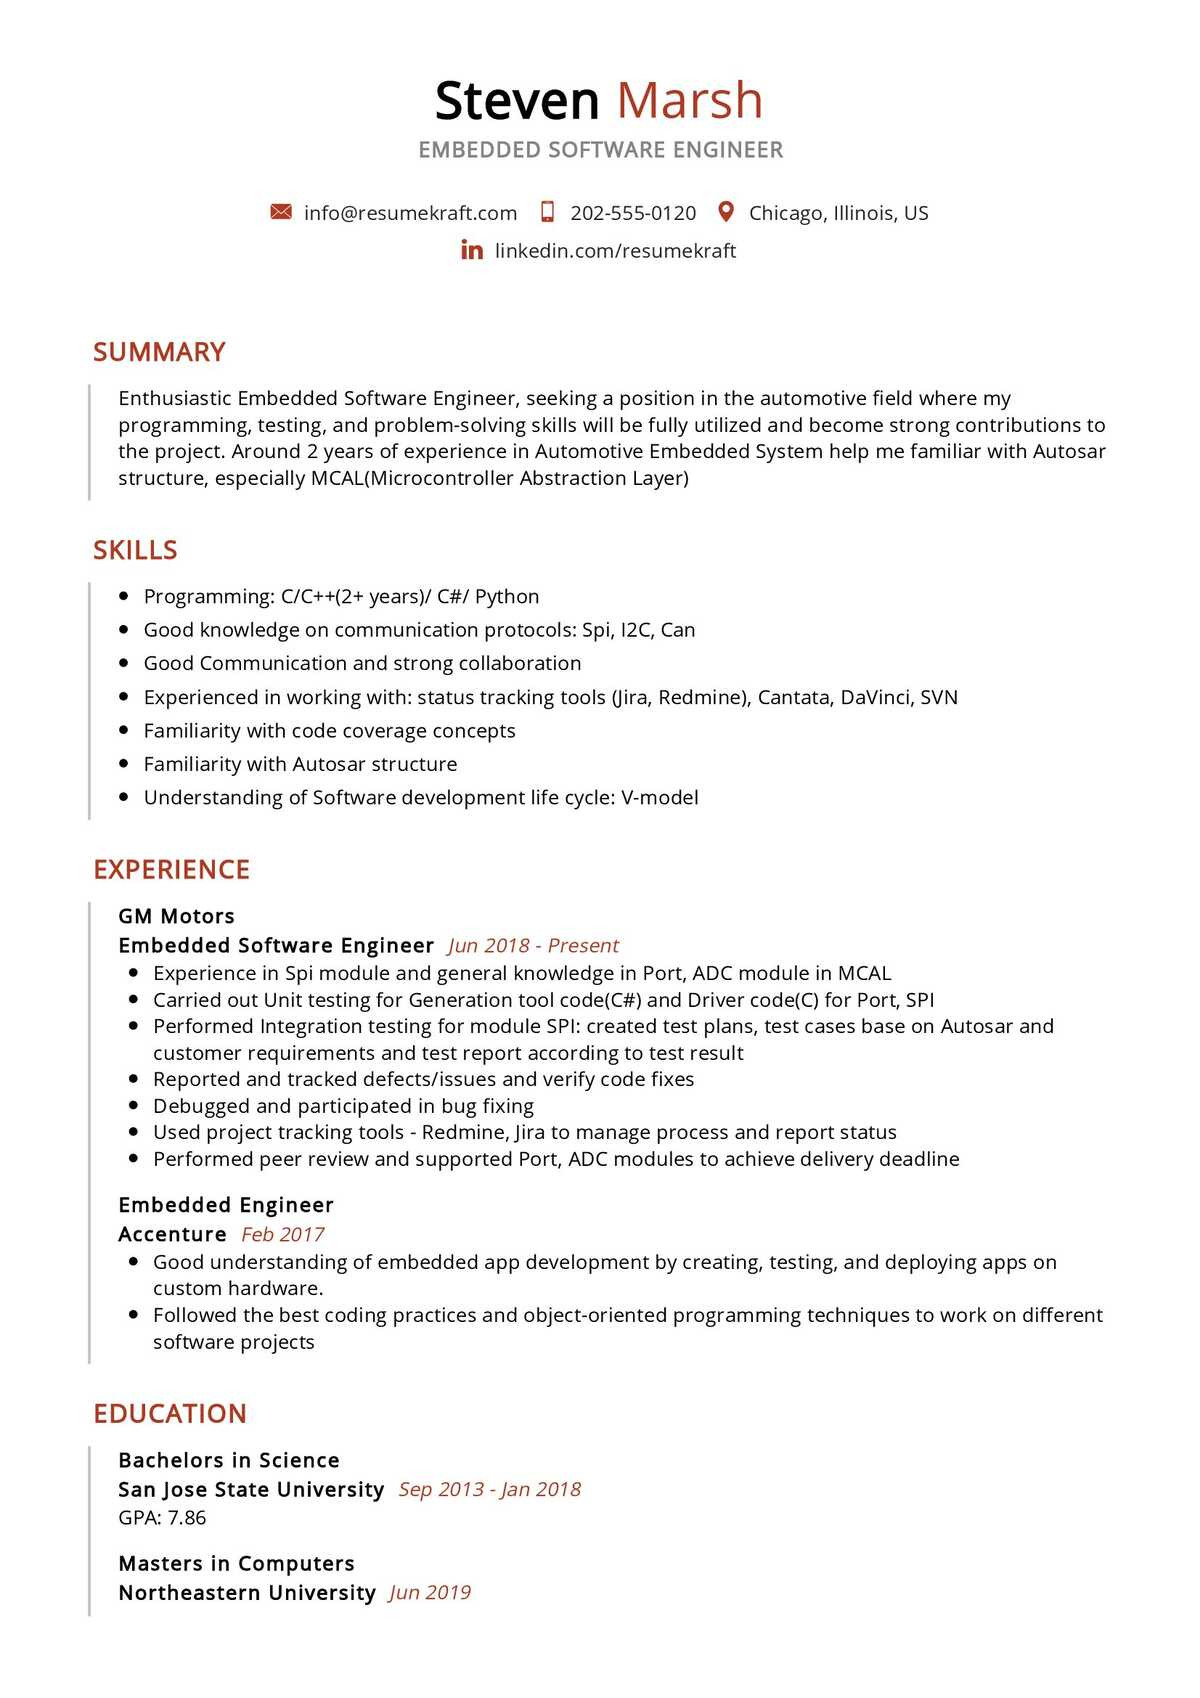 Sample Resume for Experienced Embedded software Developer Embedded software Engineer Resume Sample 2021 Writing Guide …